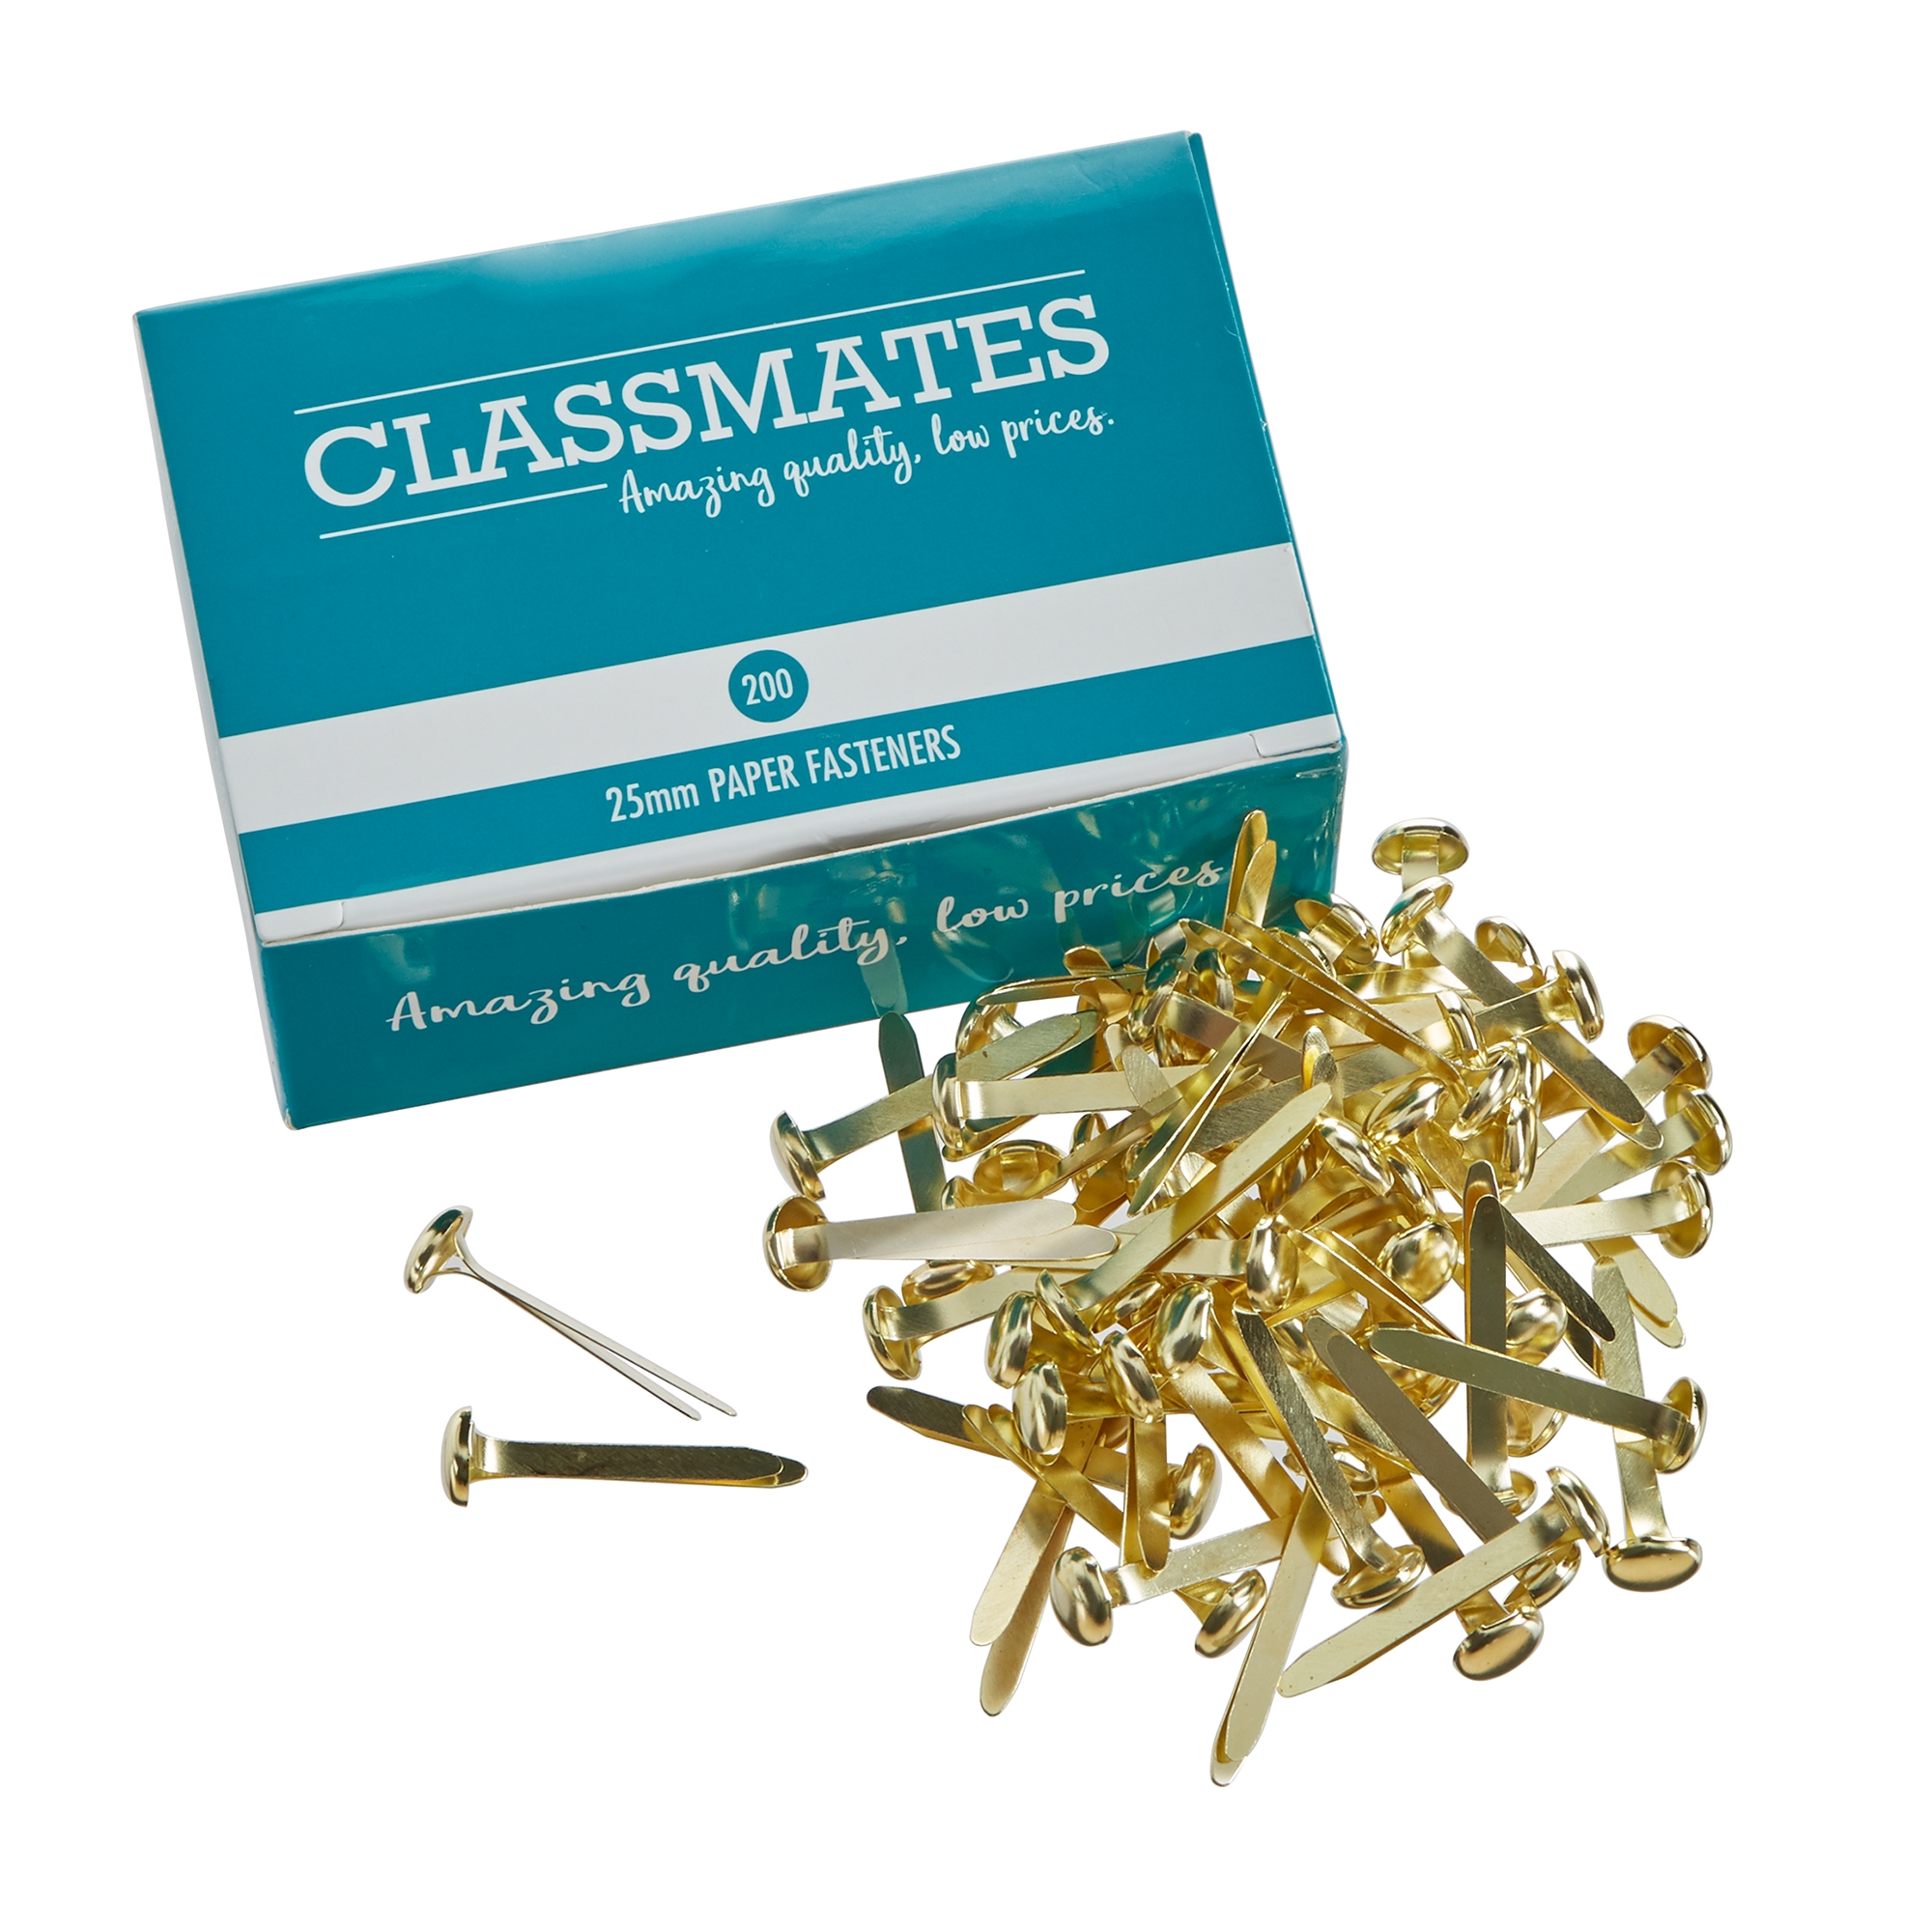 Classmates Paper Fasteners 25mm - Pack of 200